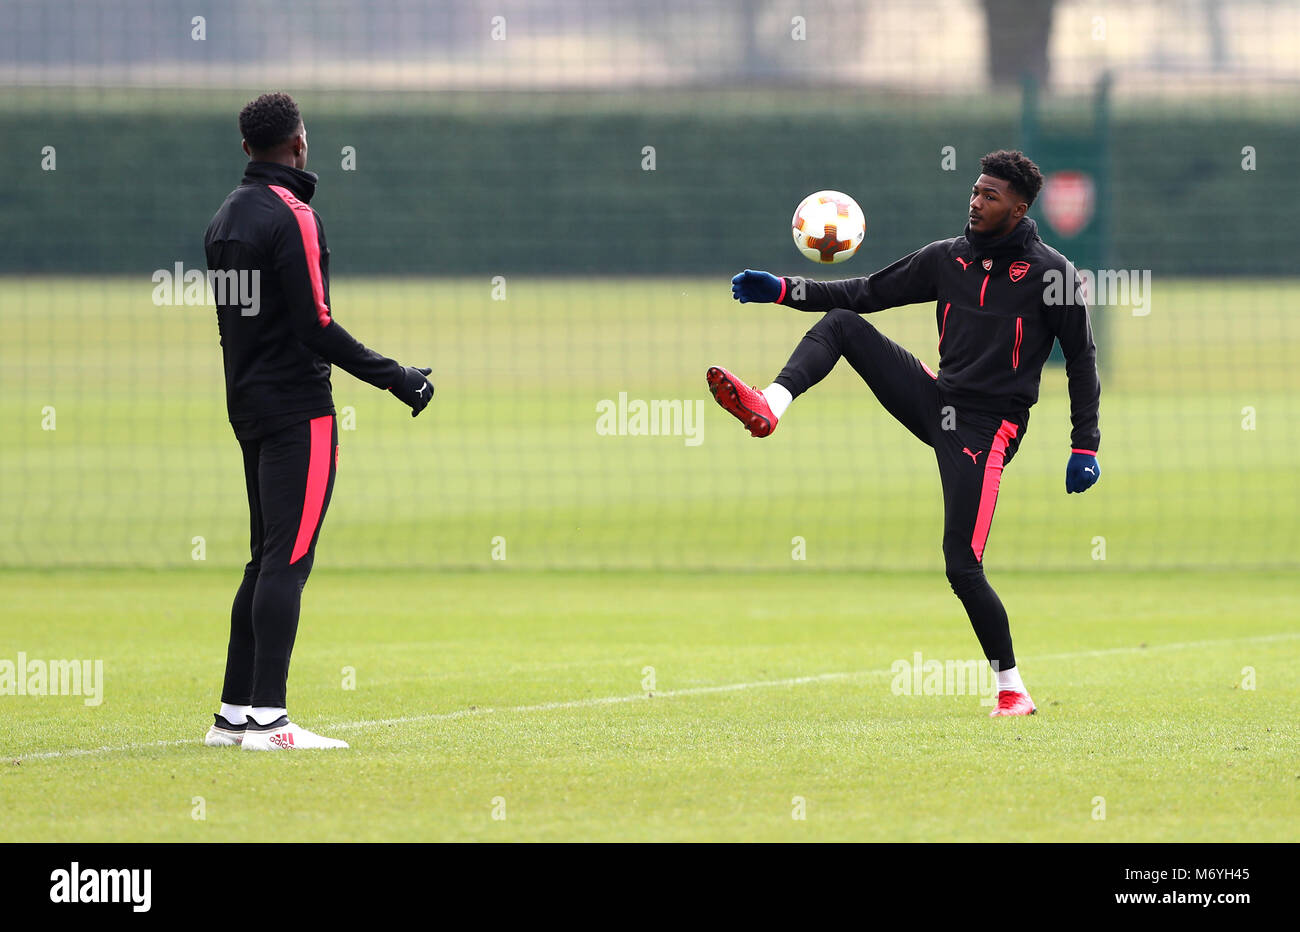 Arsenal's Ainsley Maitland-Niles (right) during the training session at London Colney, Hertfordshire. PRESS ASSOCIATION Photo. Picture date: Wednesday March 7, 2018. See PA story SOCCER Arsenal. Photo credit should read: Tim Goode/PA Wire Stock Photo